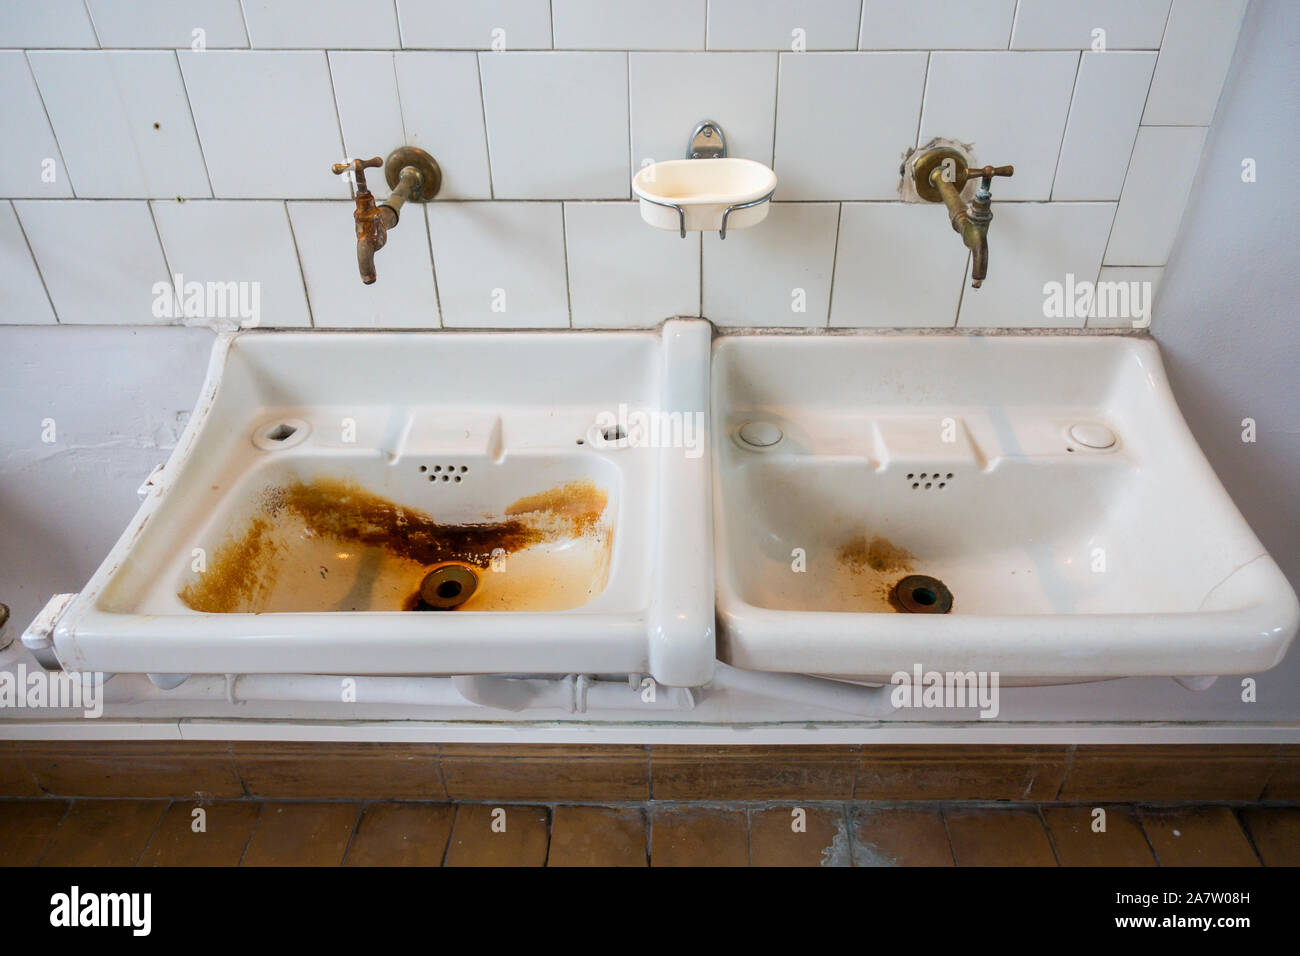 Two dirty sinks / wash basins covered in rusty stains in bathroom of disused clinic Stock Photo